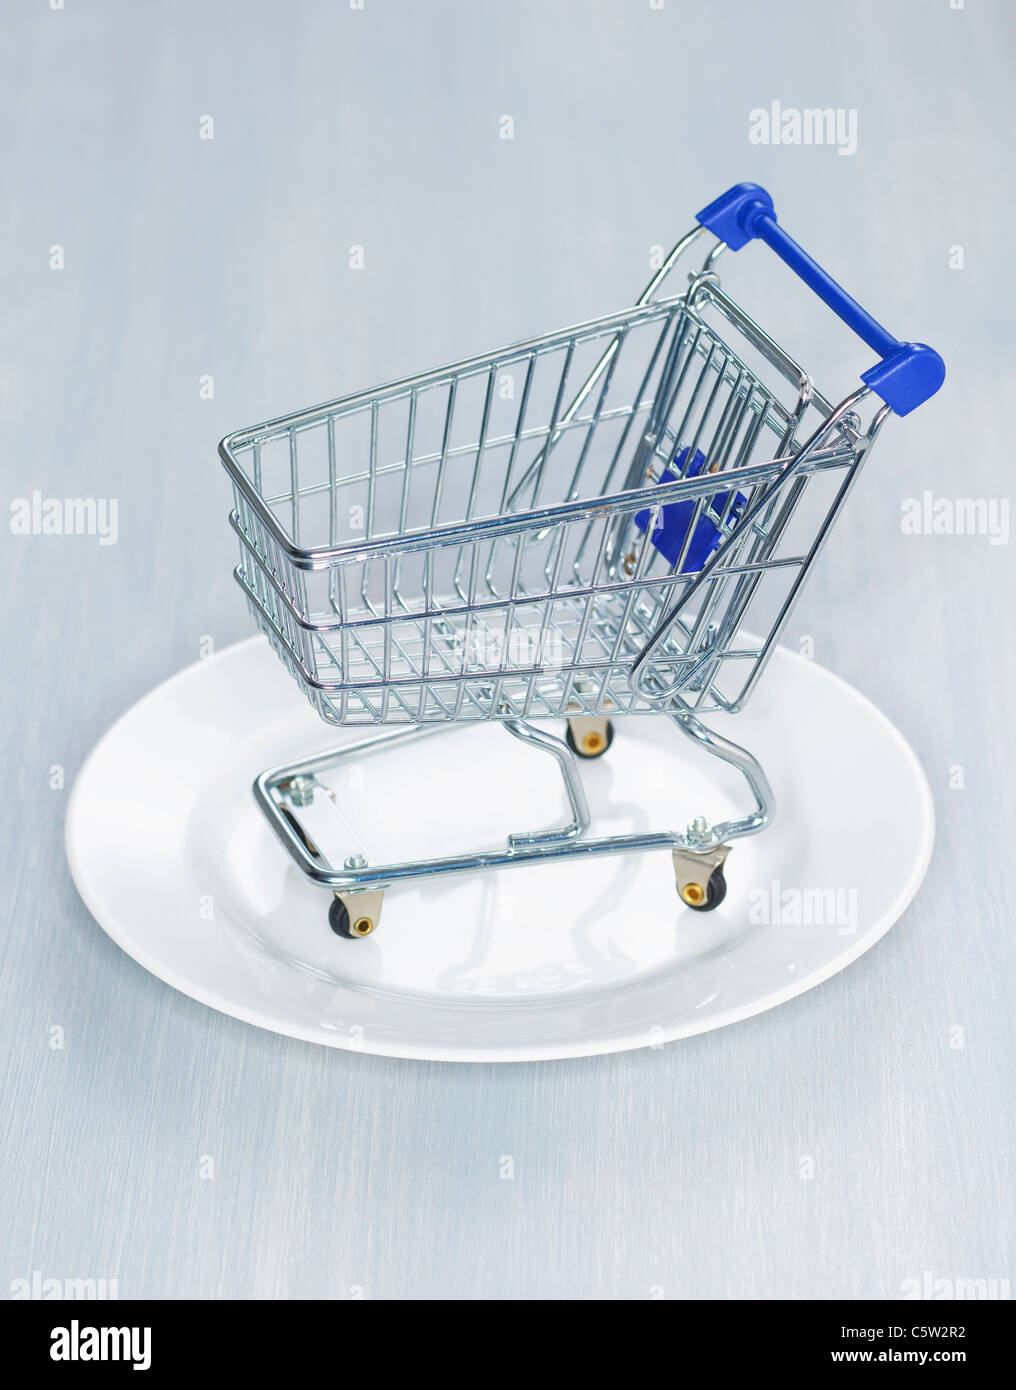 Empty shopping cart on plate Stock Photo